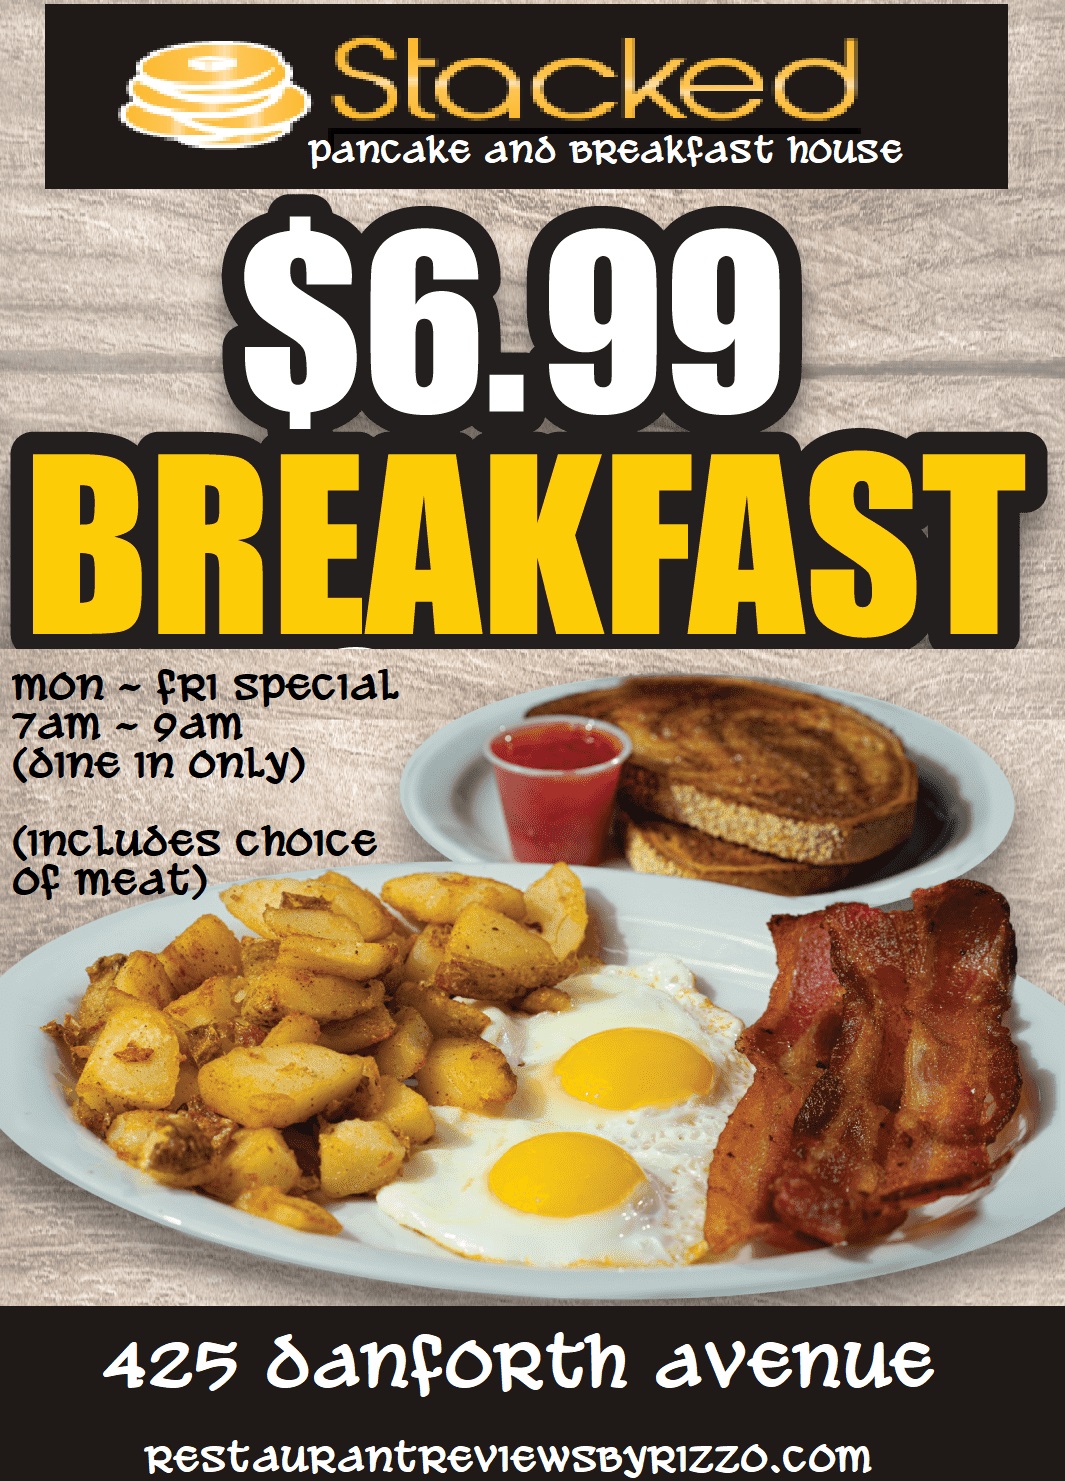 Stacked breakfast special